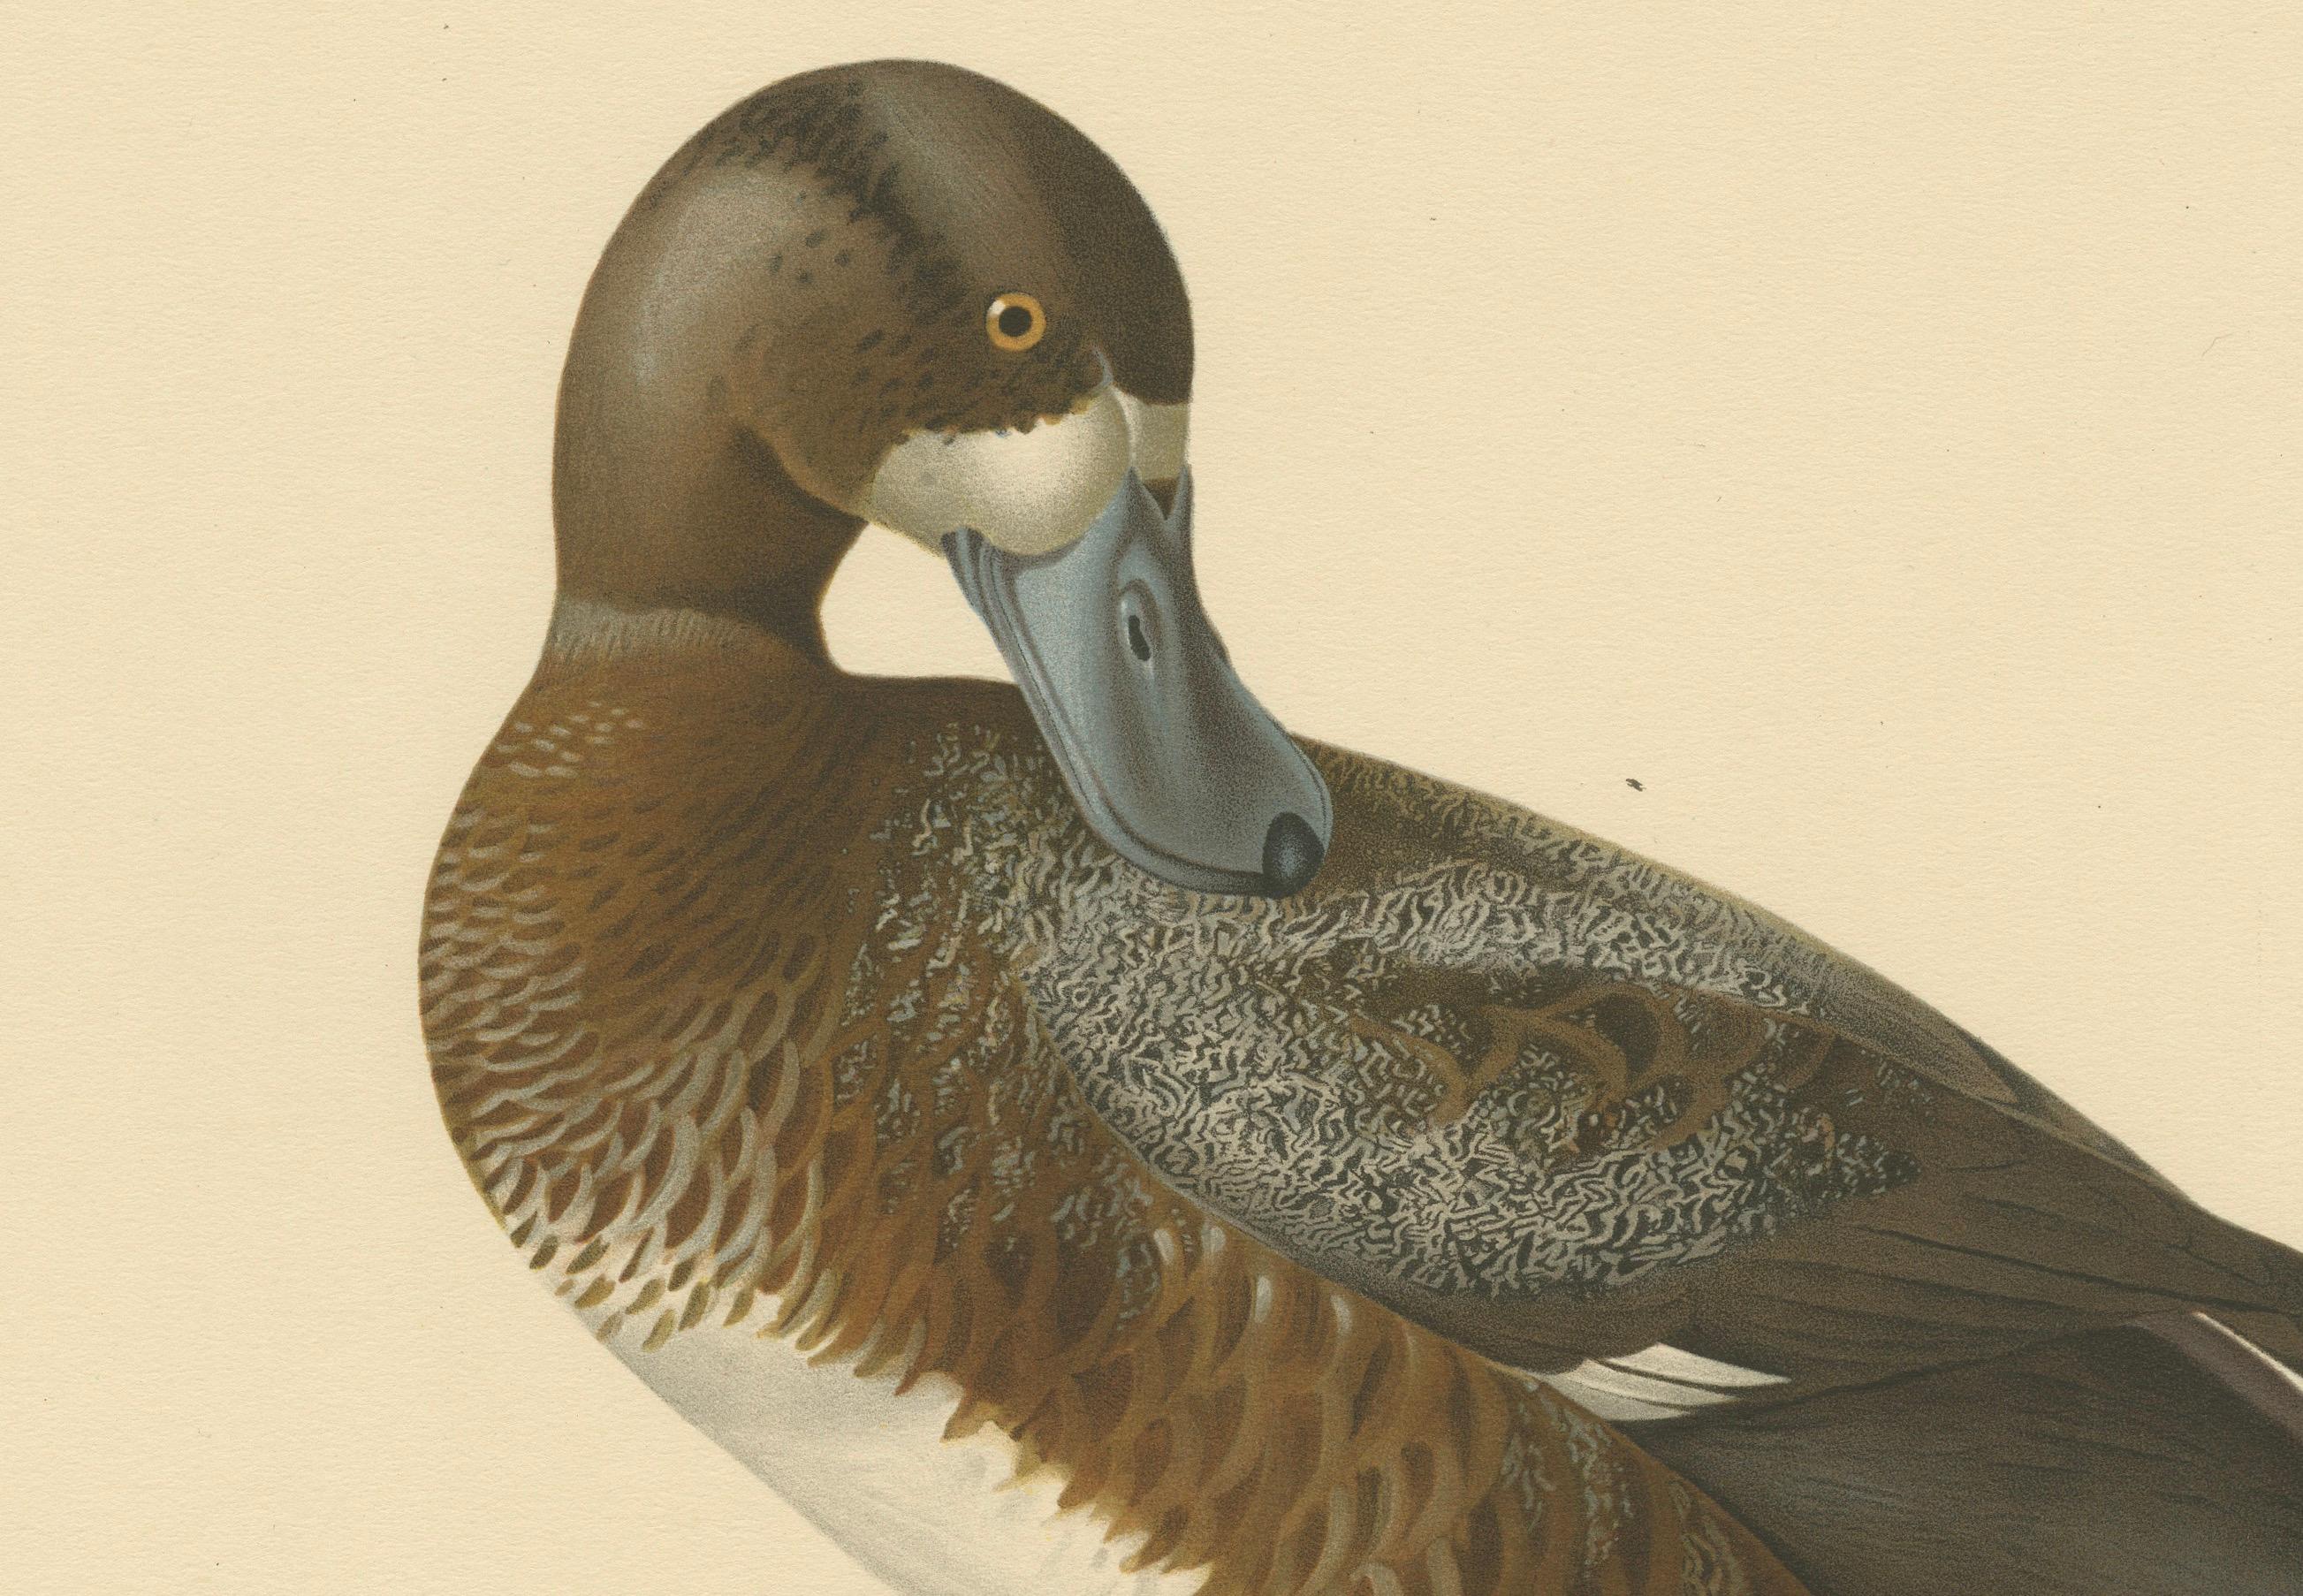 This print captures a male Greater Scaup, also known by the scientific name Nyroca marila. The duck is depicted in a relaxed, seated position, likely on a rock near a body of water, which is subtly indicated by the blue wash beneath the rock. The